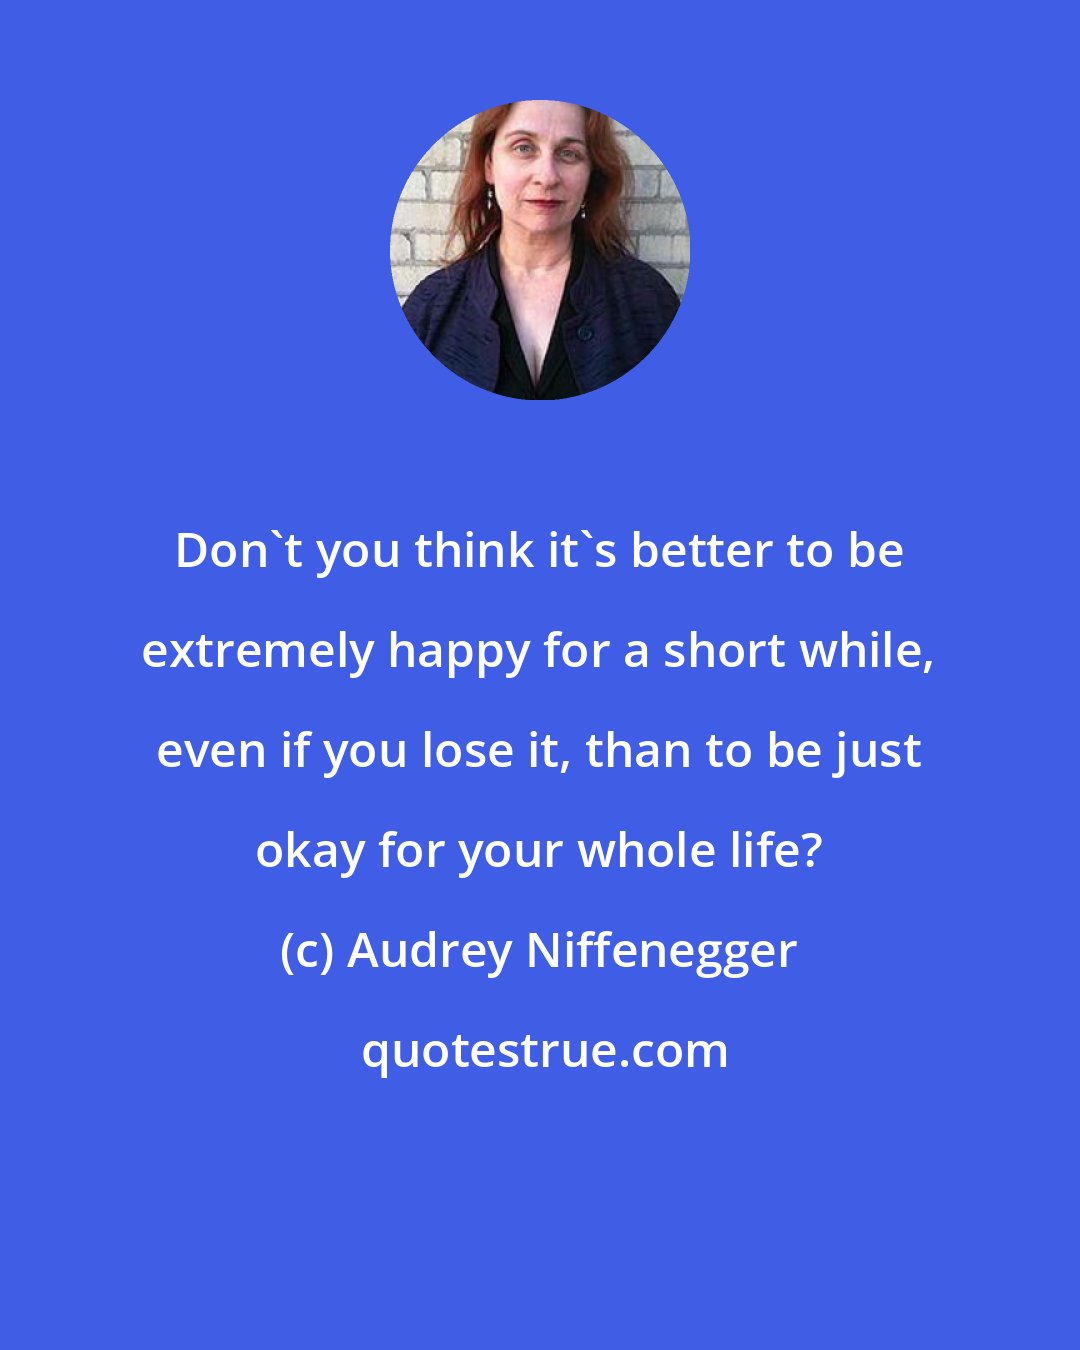 Audrey Niffenegger: Don't you think it's better to be extremely happy for a short while, even if you lose it, than to be just okay for your whole life?